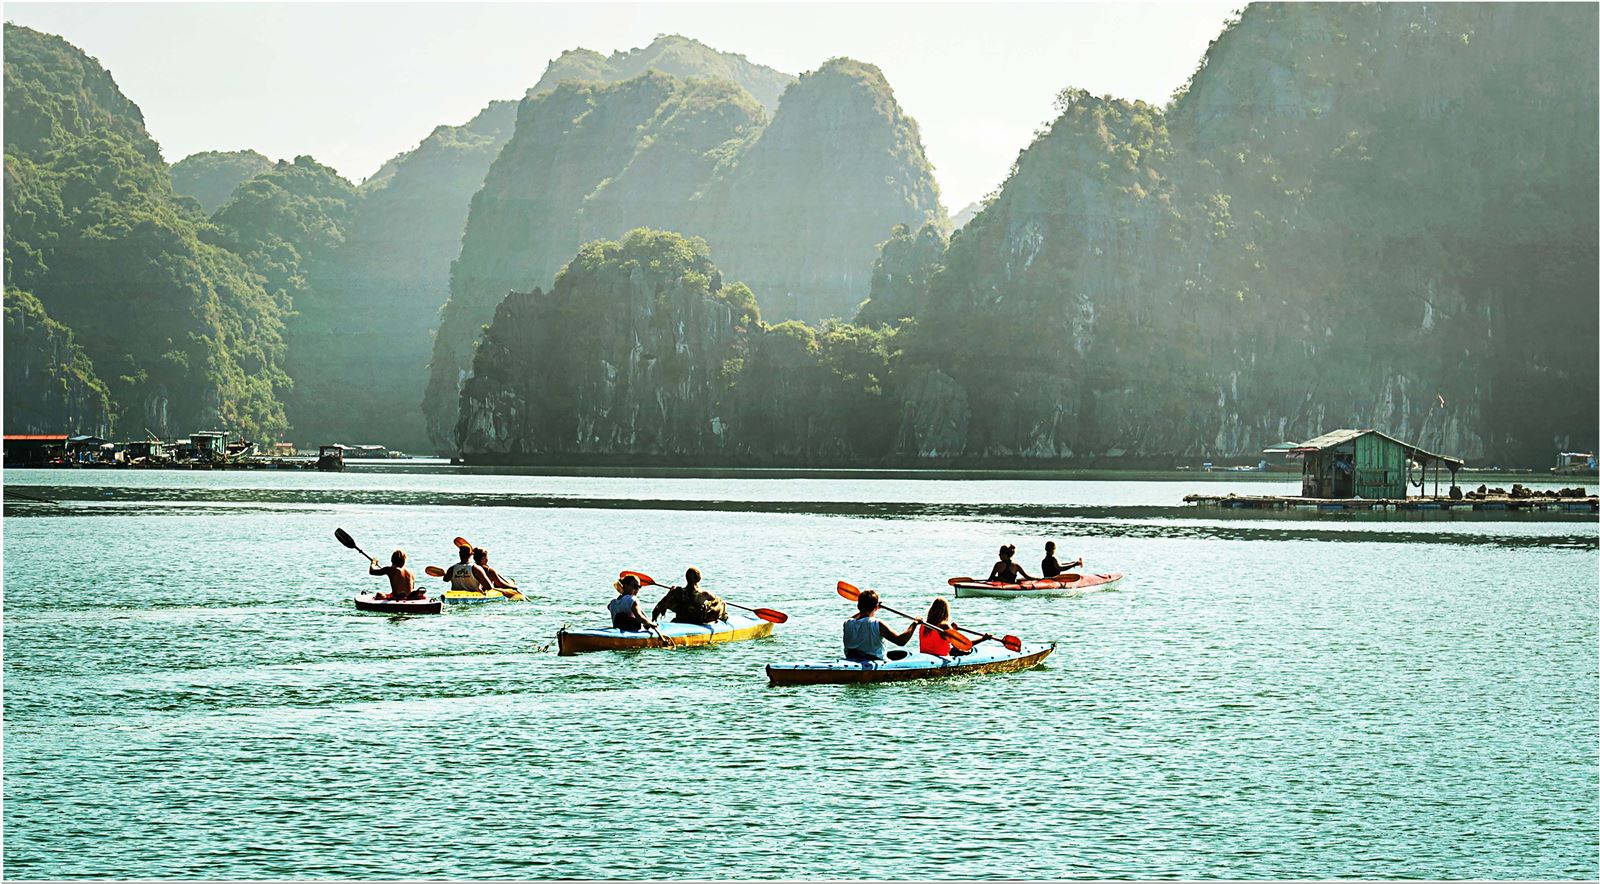 Lan Ha Bay is an ideal destination for tourists to experience kayaking